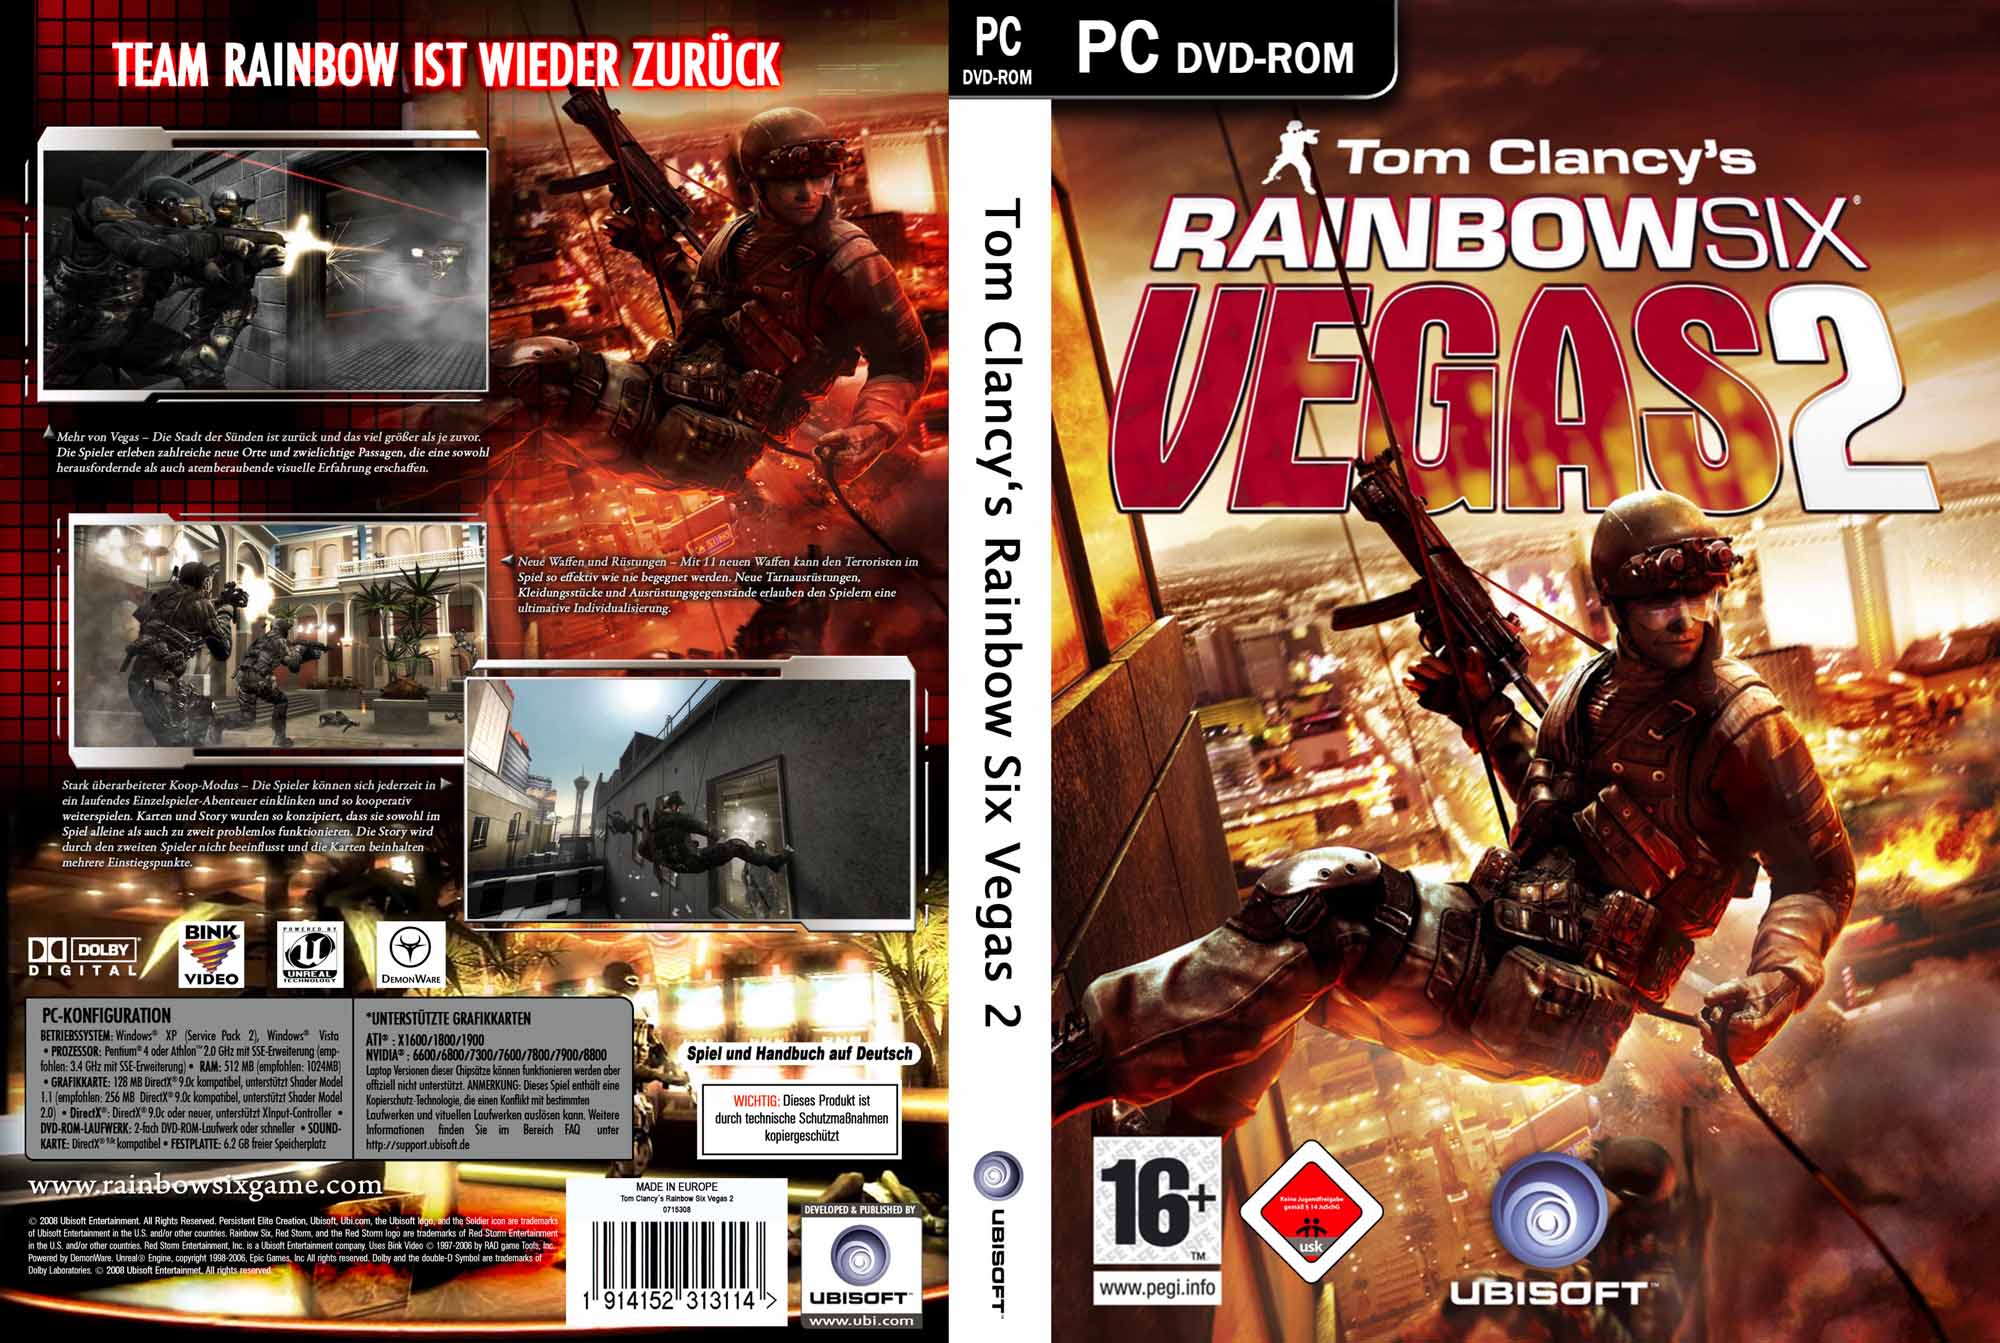 what is the cd key for rainbow six vegas 2 steam